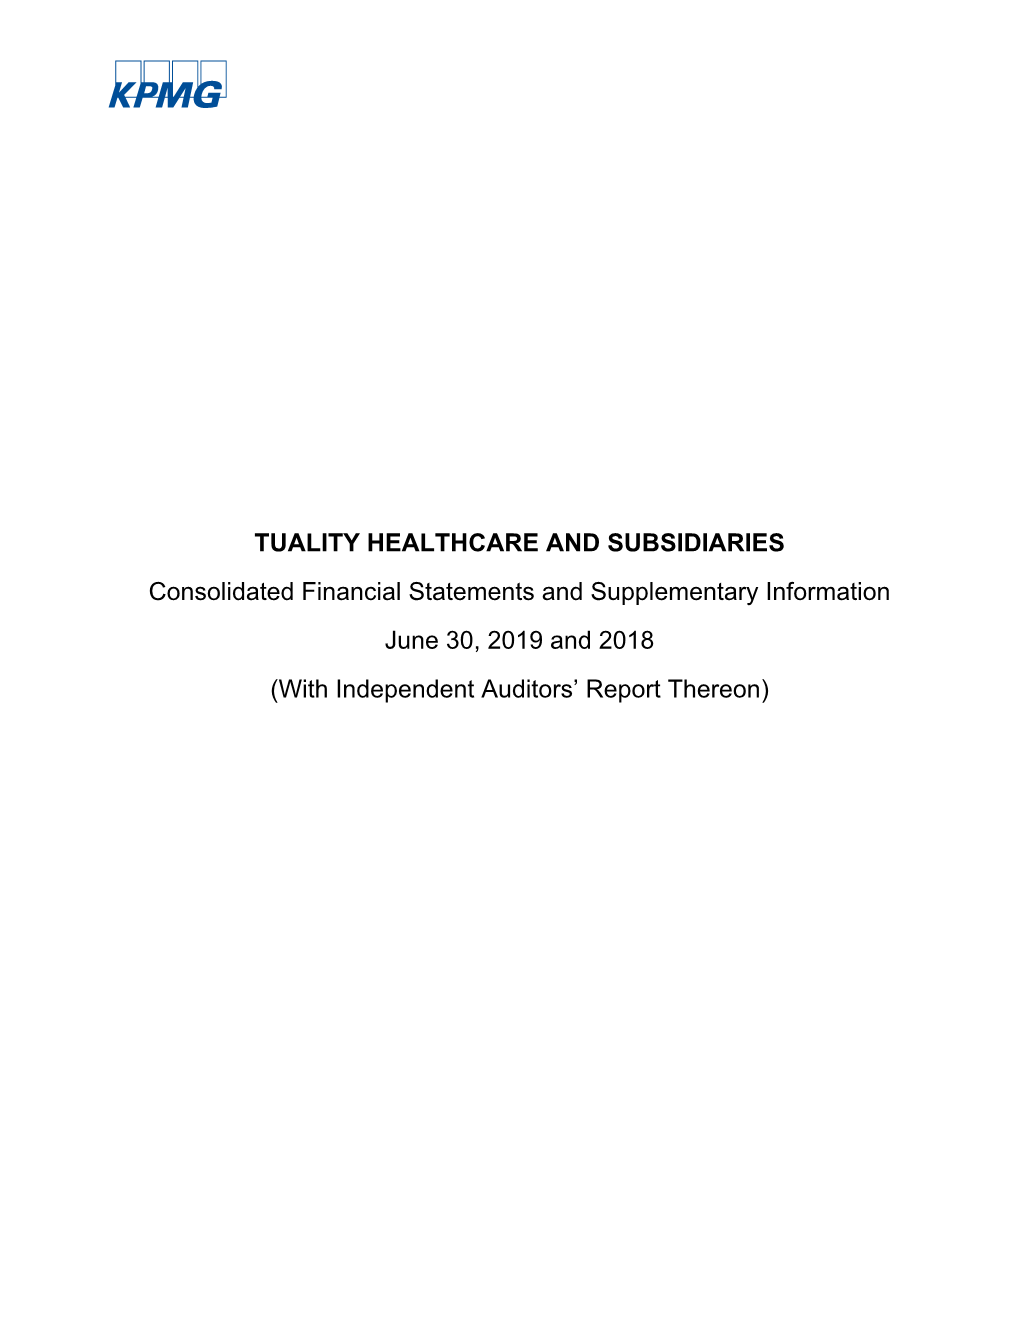 Tuality Healthcare and Subsidiaries